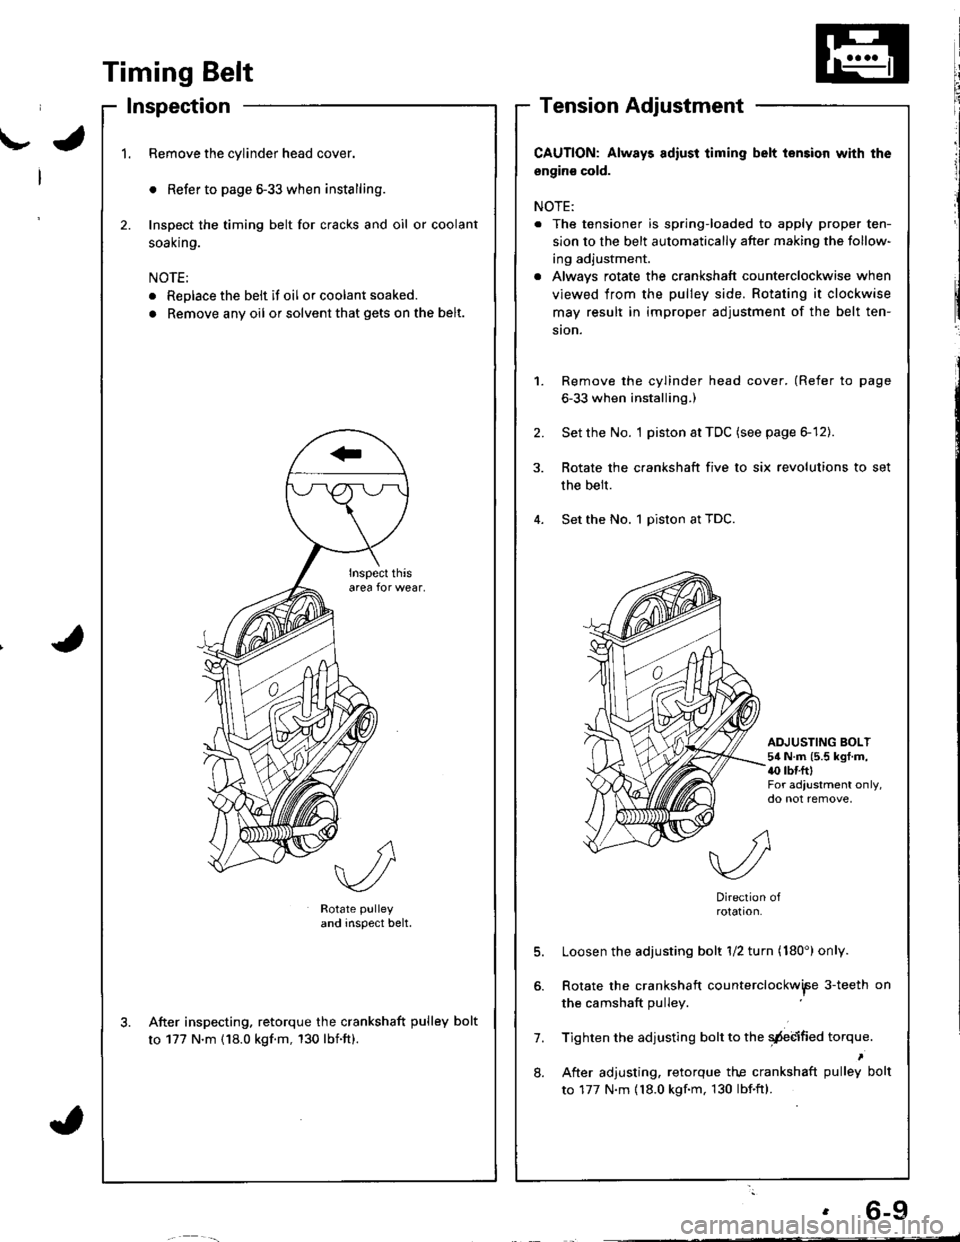 HONDA INTEGRA 1998 4.G Manual PDF \-a
I
I
{
. 6-9
Timing Belt
Inspection
1.Remove the cylinder head cover.
o Refer to page 6-33 when installing.
Inspect the timing belt for cracks and oil or coolant
soal(n9.
NOTE:
. Replace the belt i